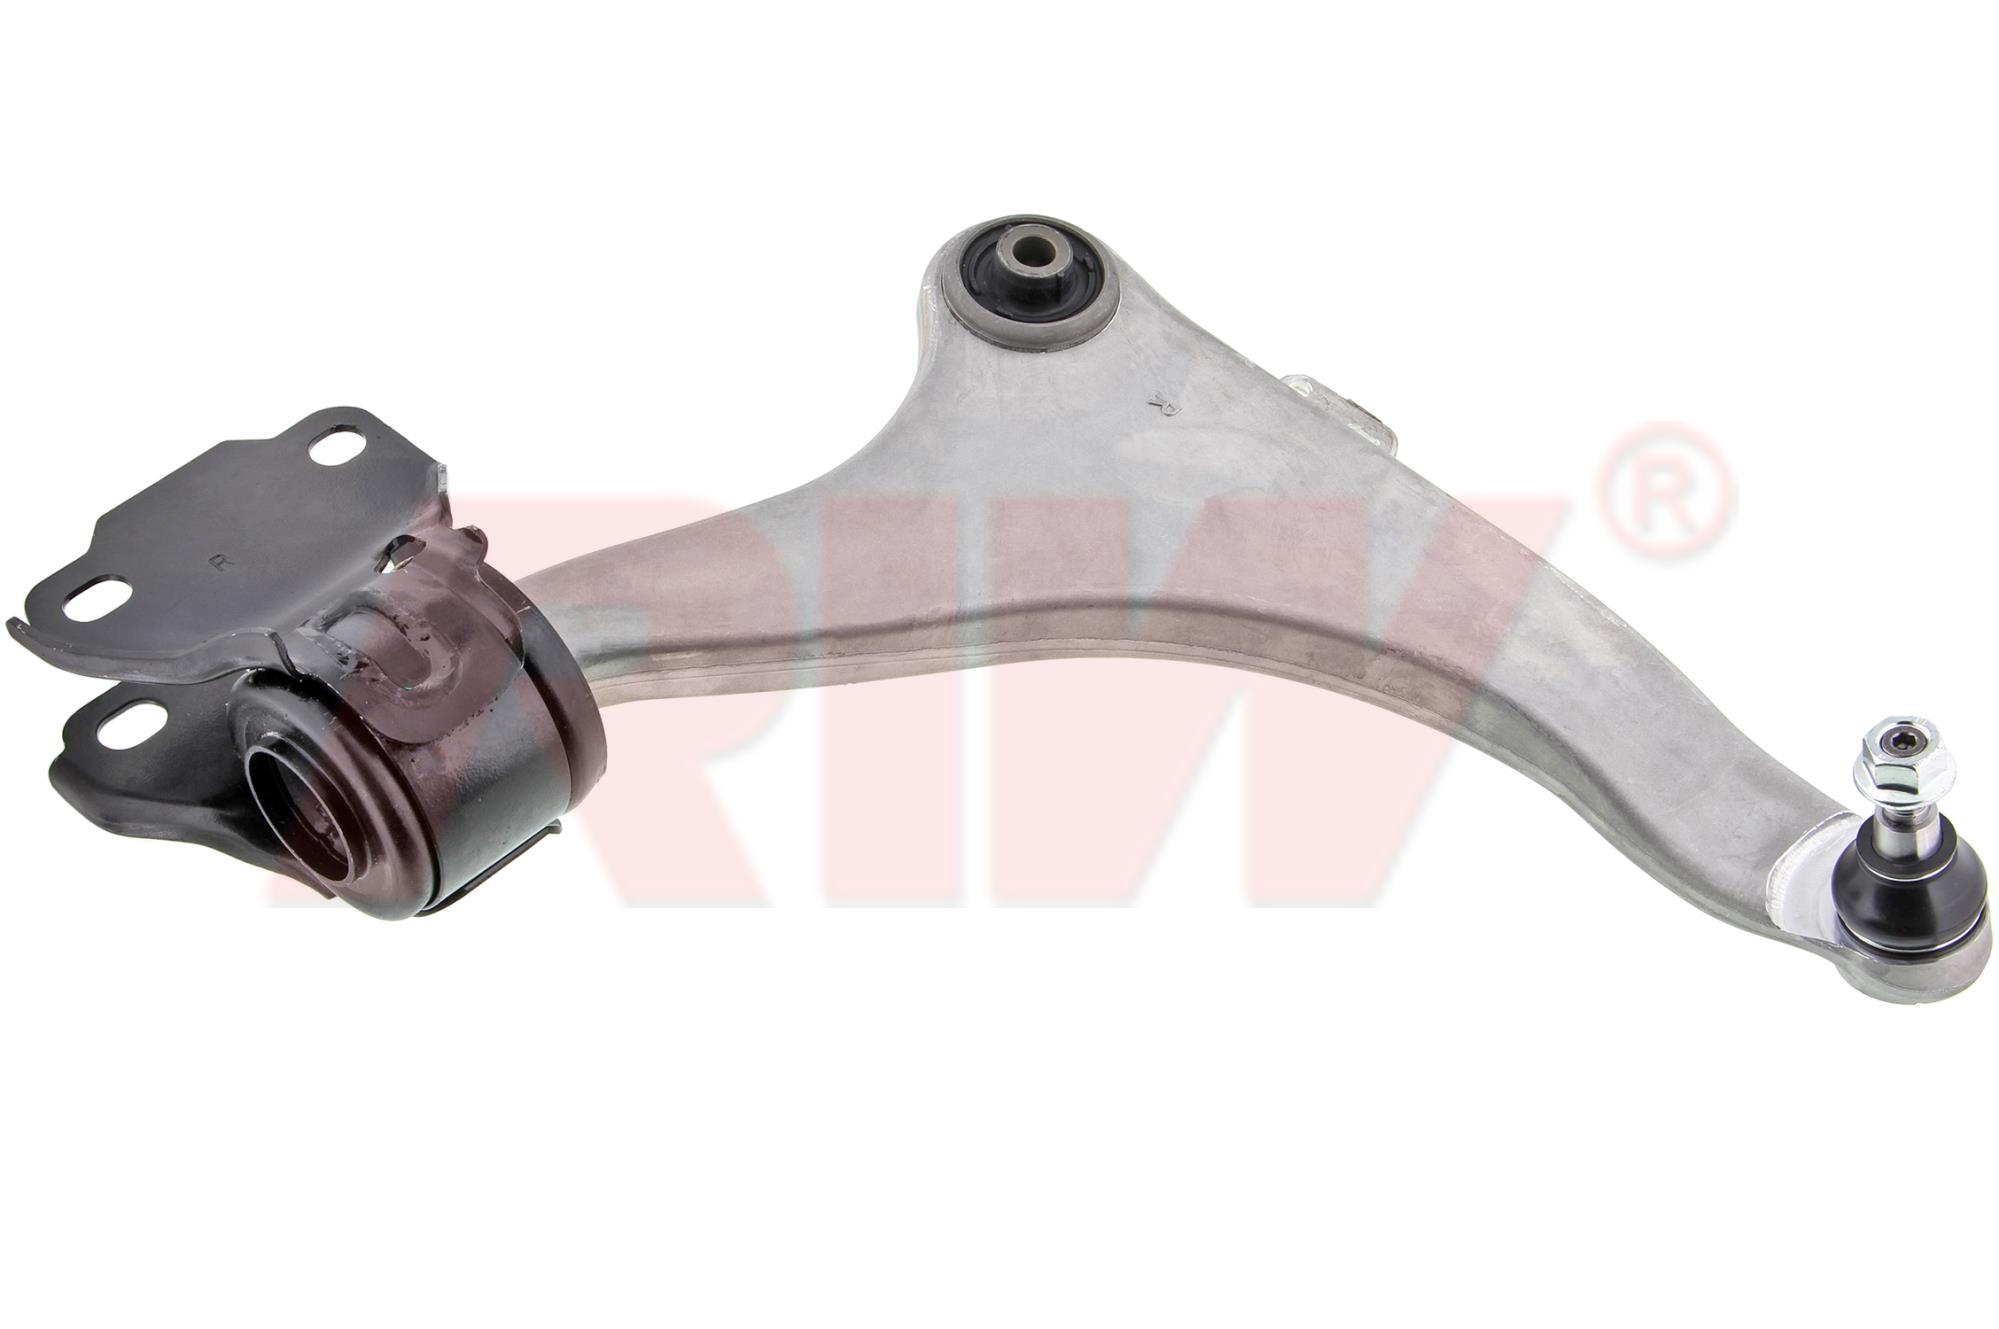 VOLVO S80 (II AS) 2006 - 2016 Control Arm